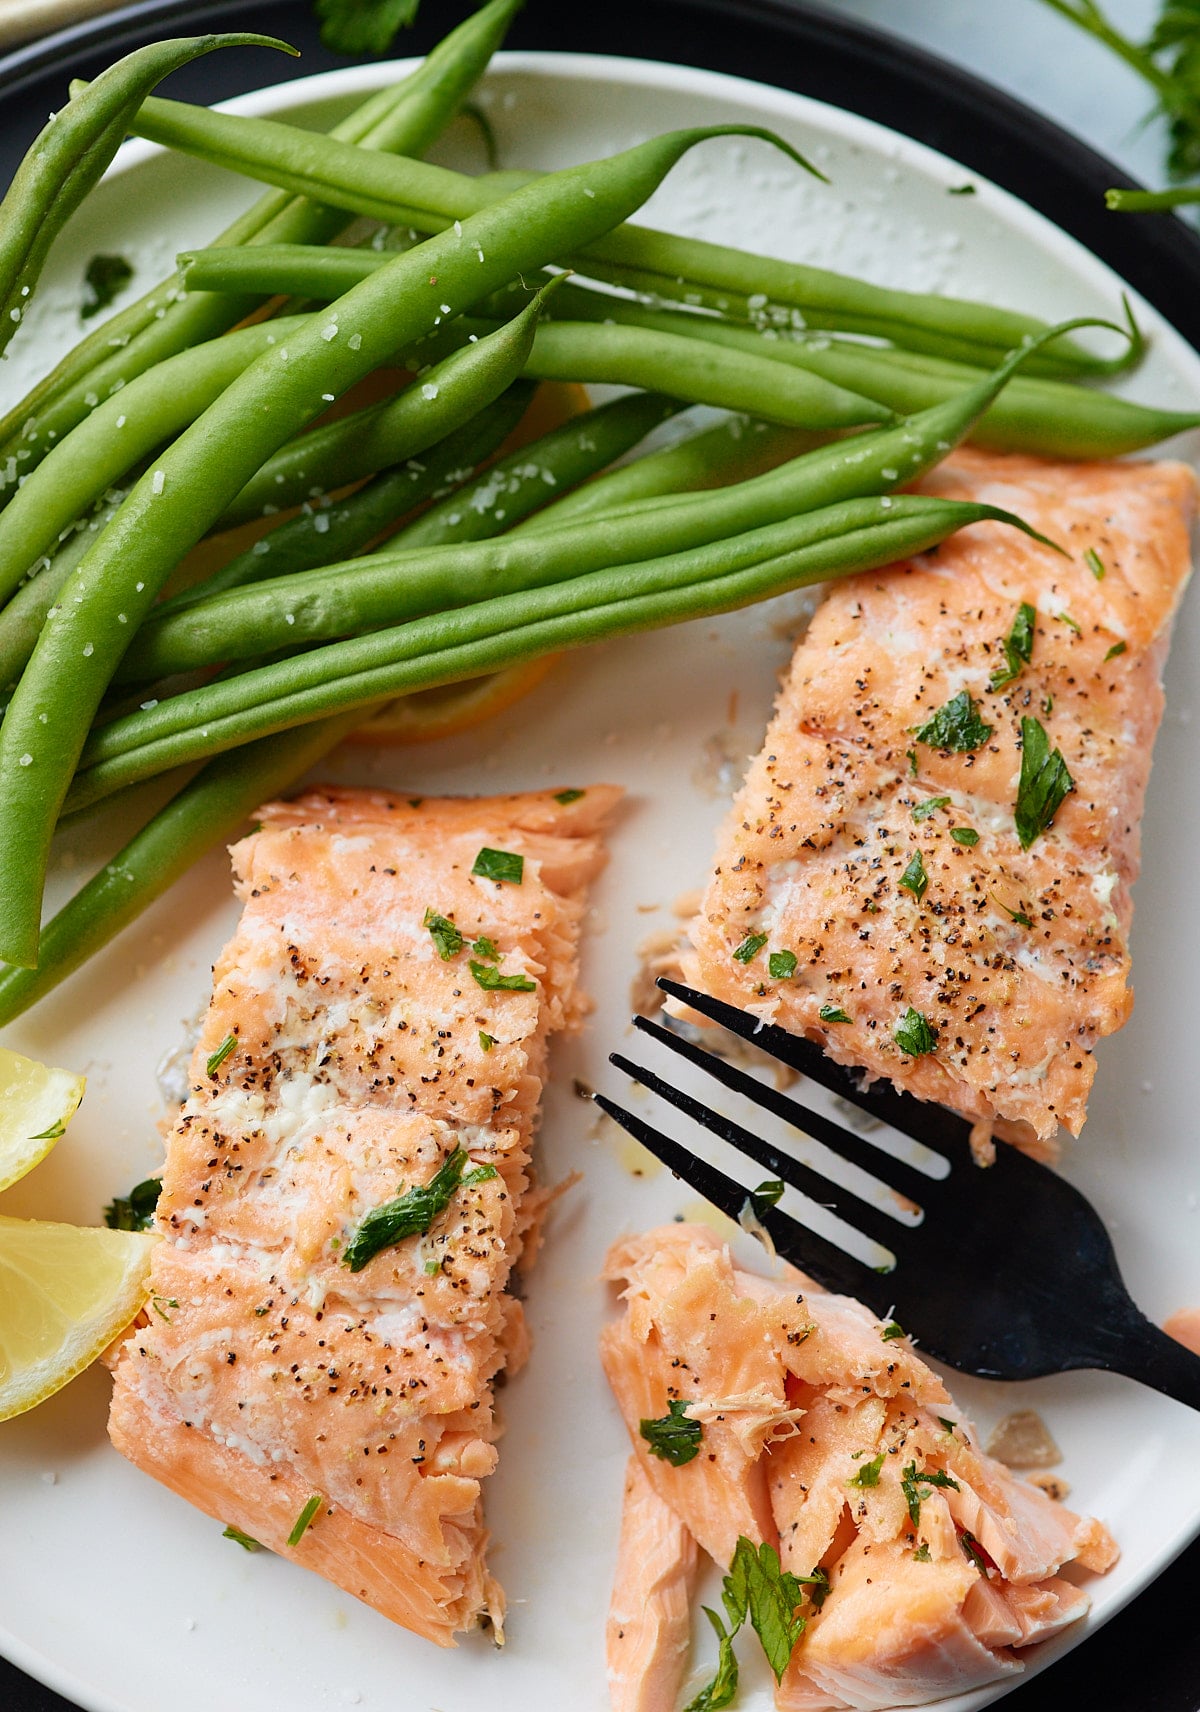 A fork cutting a baked salmon fillet.